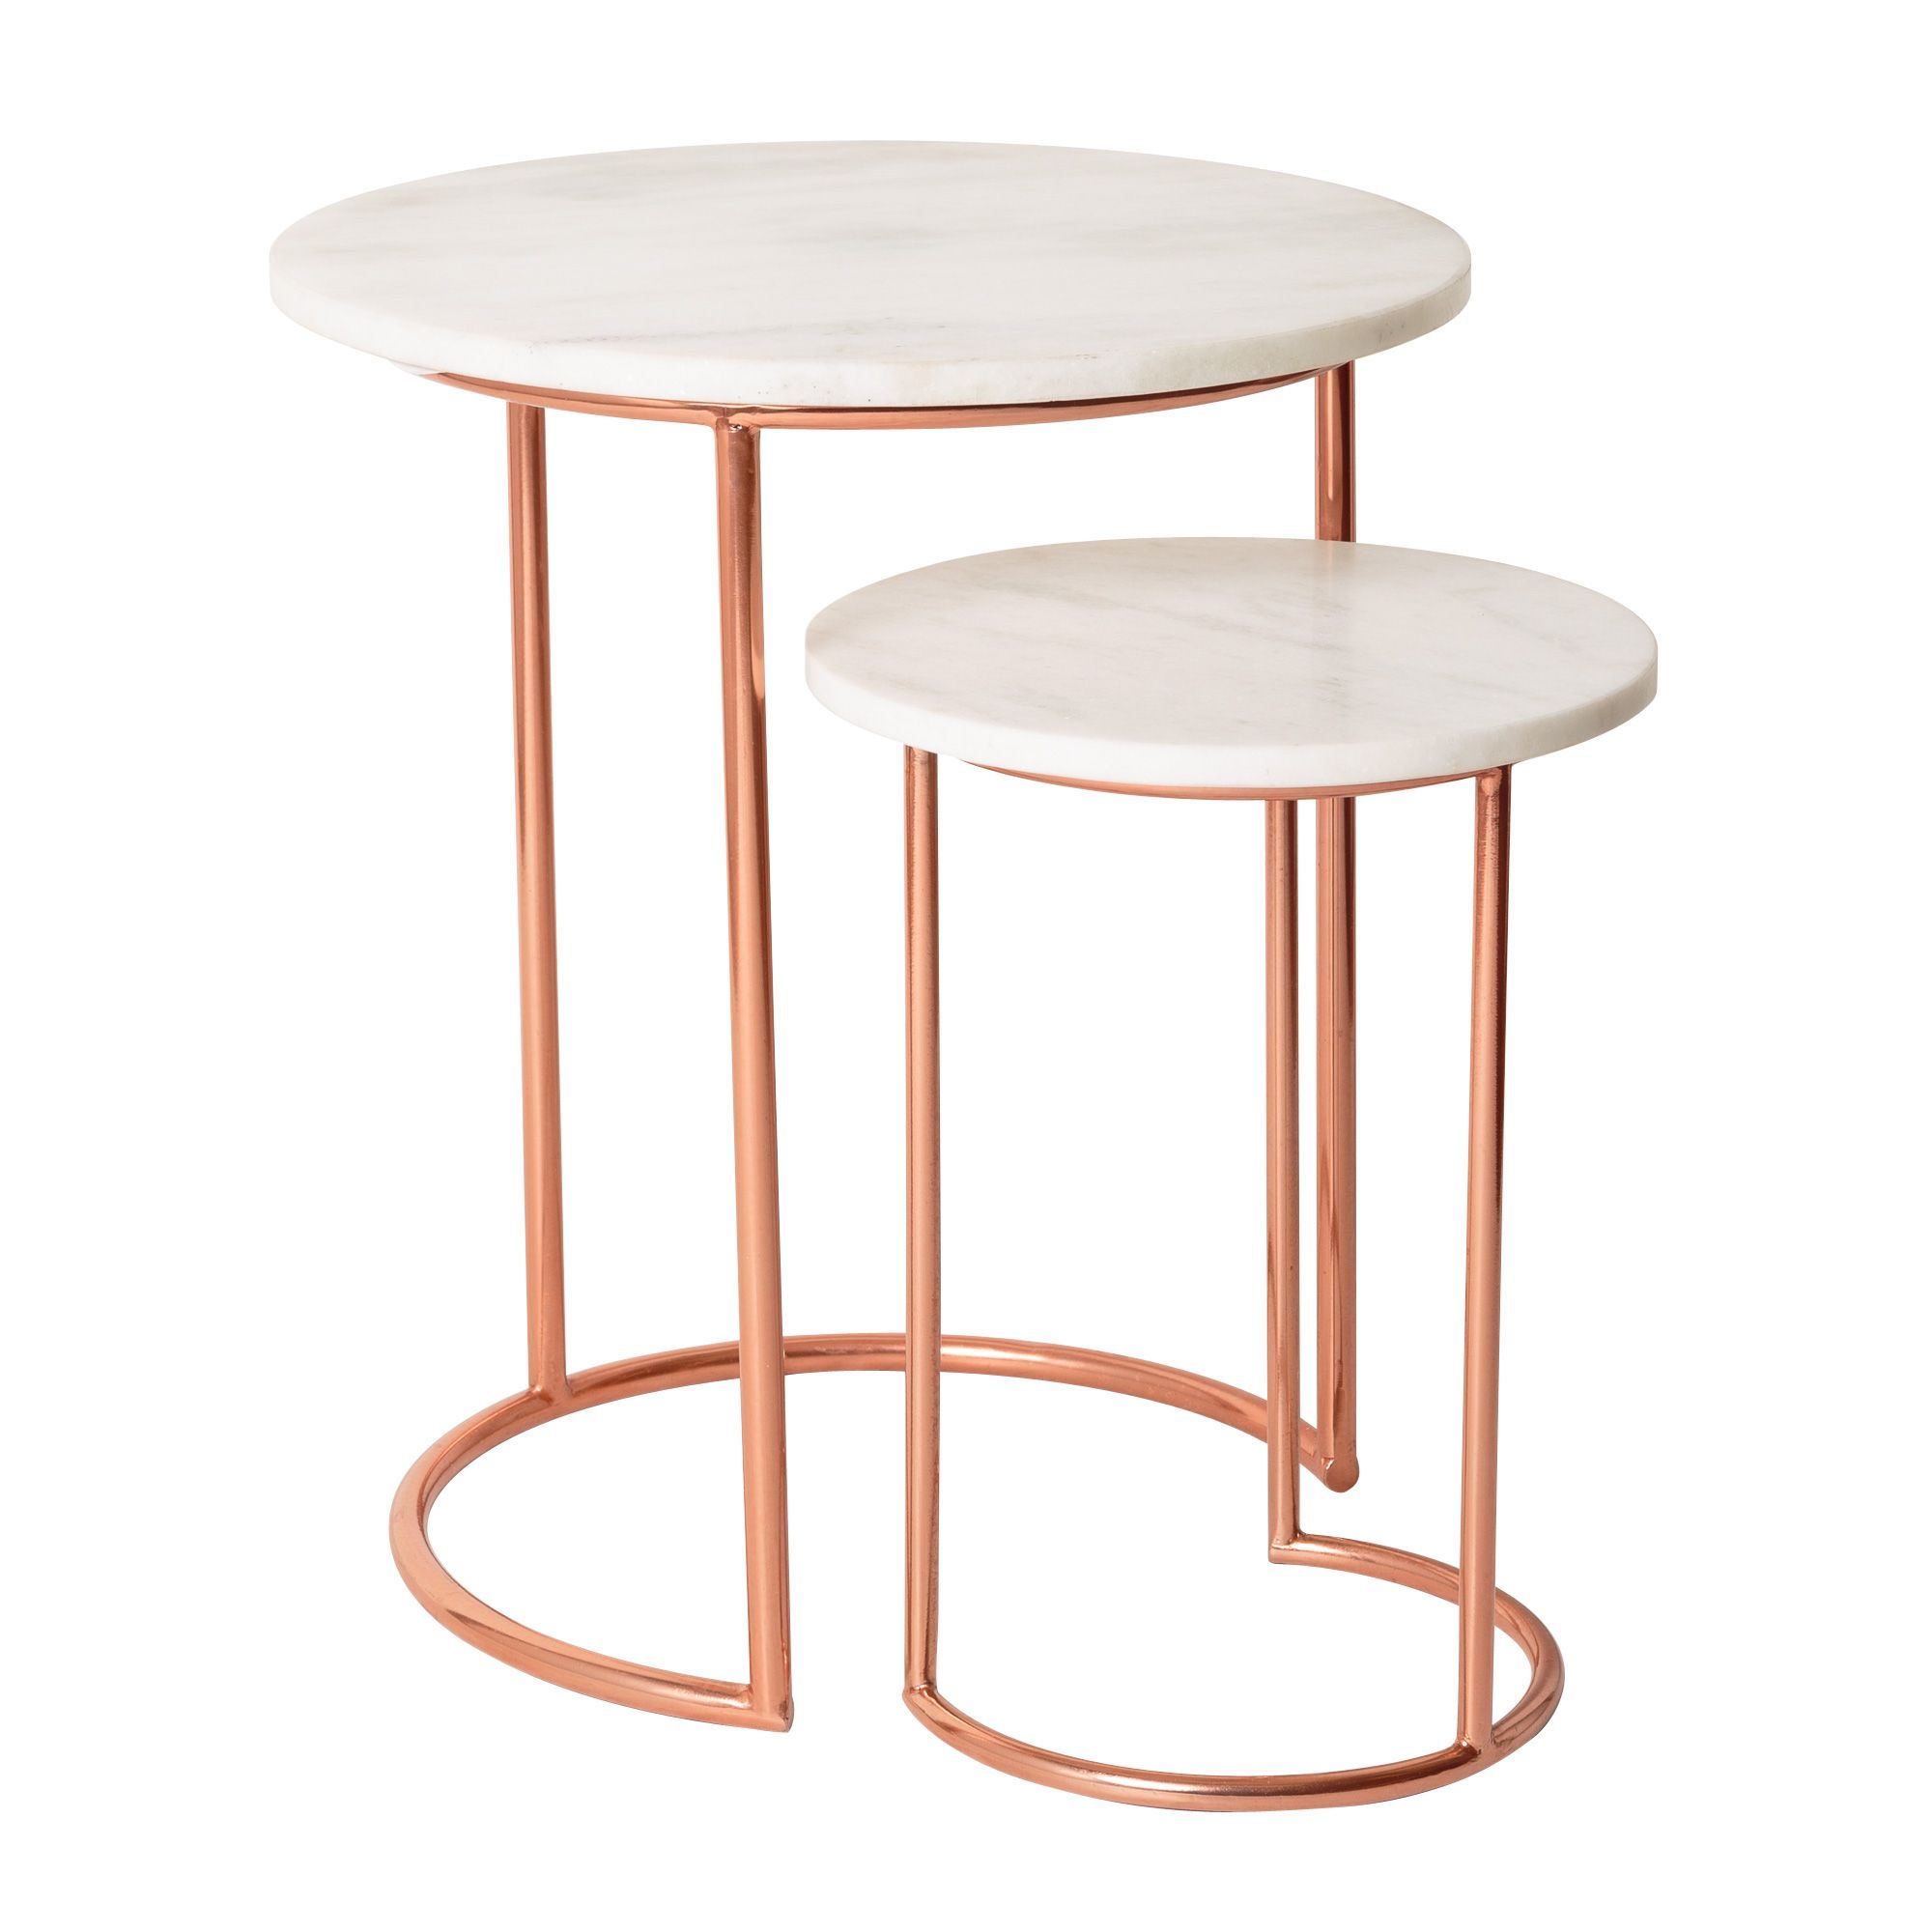 Muse Marble & Copper Nesting Tables | Copper Decor, Copper And Marble Within Round Gold Metal Cage Nesting Ottomans Set Of  (View 4 of 20)